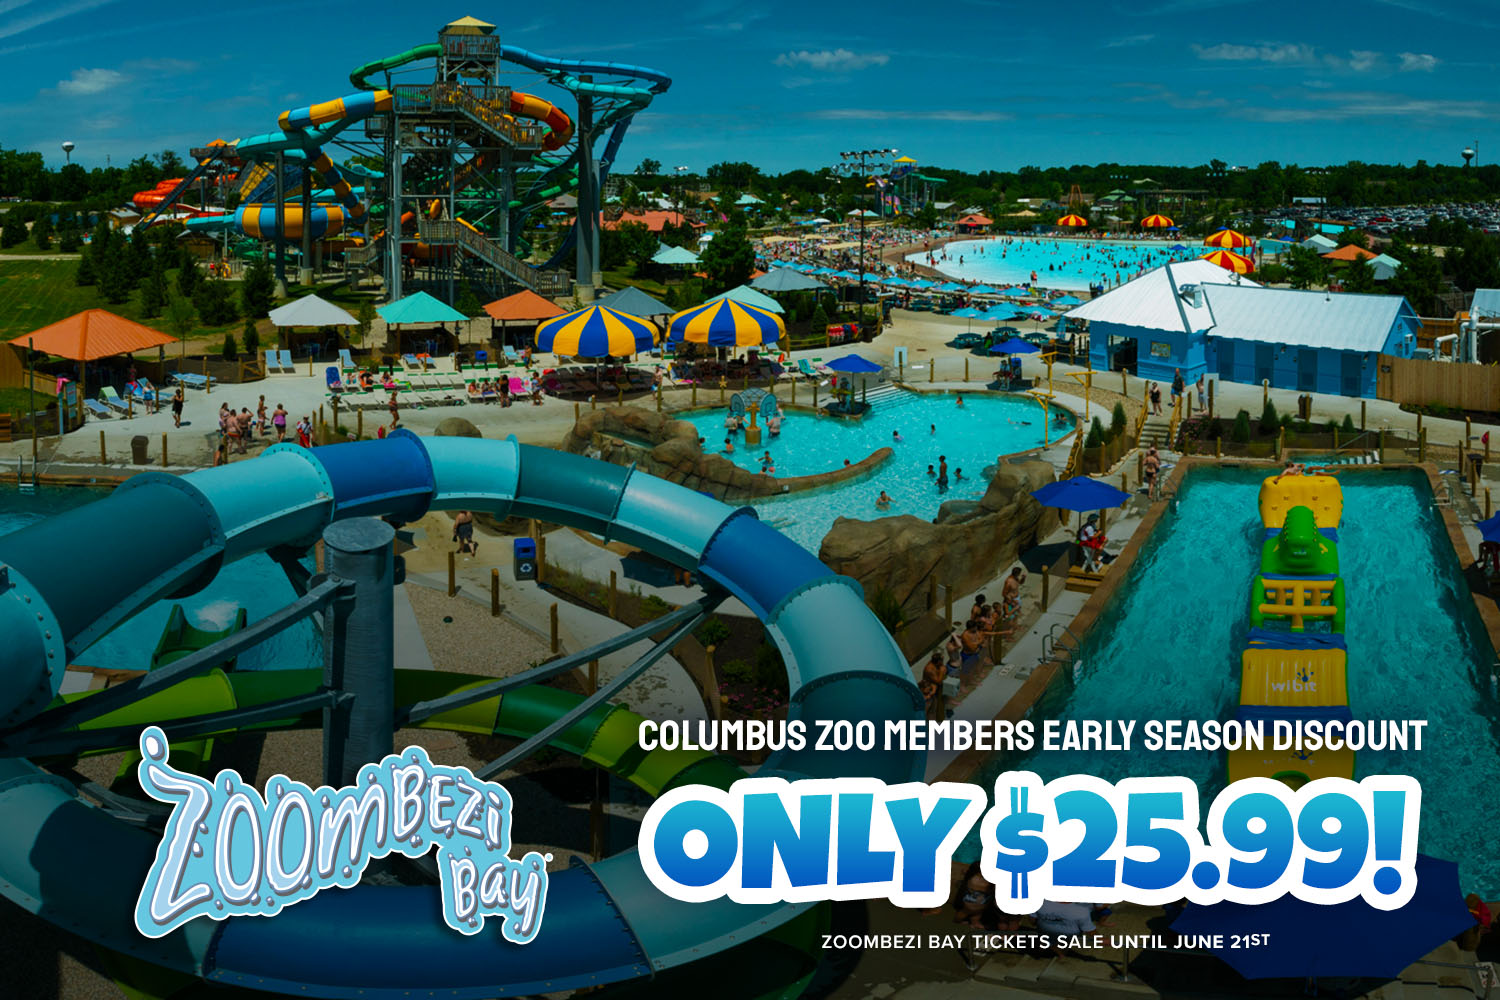 graphic that shows zoombezi bay waterpark with text mentioning a sale